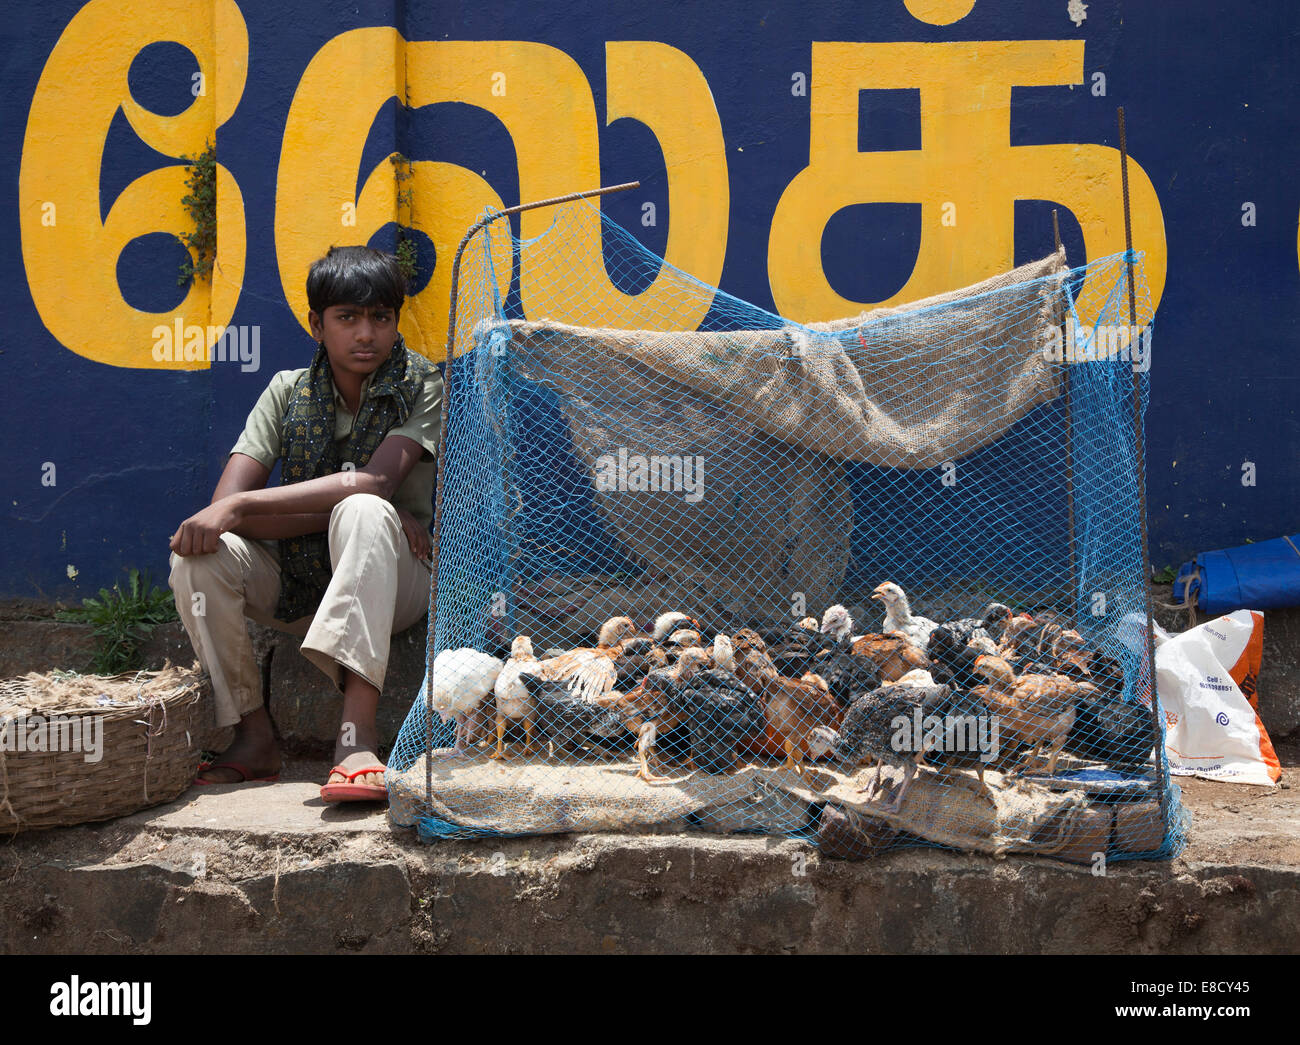 Boy selling chickens on streets of Ooty, Tamil Nadu, India Stock Photo